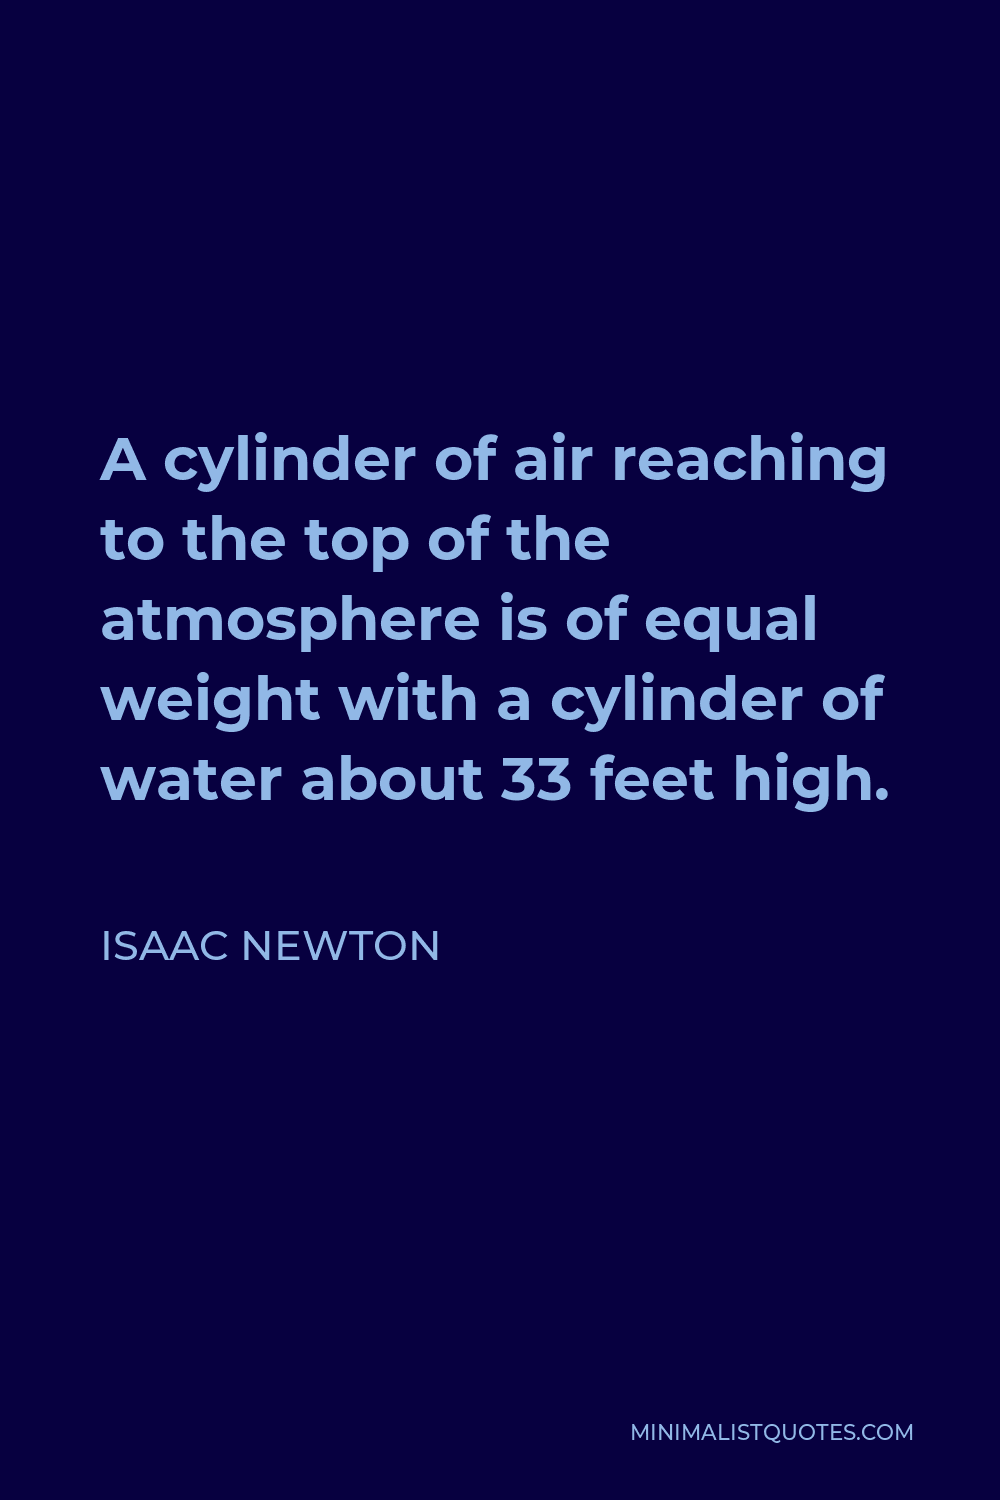 Isaac Newton Quote - A cylinder of air reaching to the top of the atmosphere is of equal weight with a cylinder of water about 33 feet high.